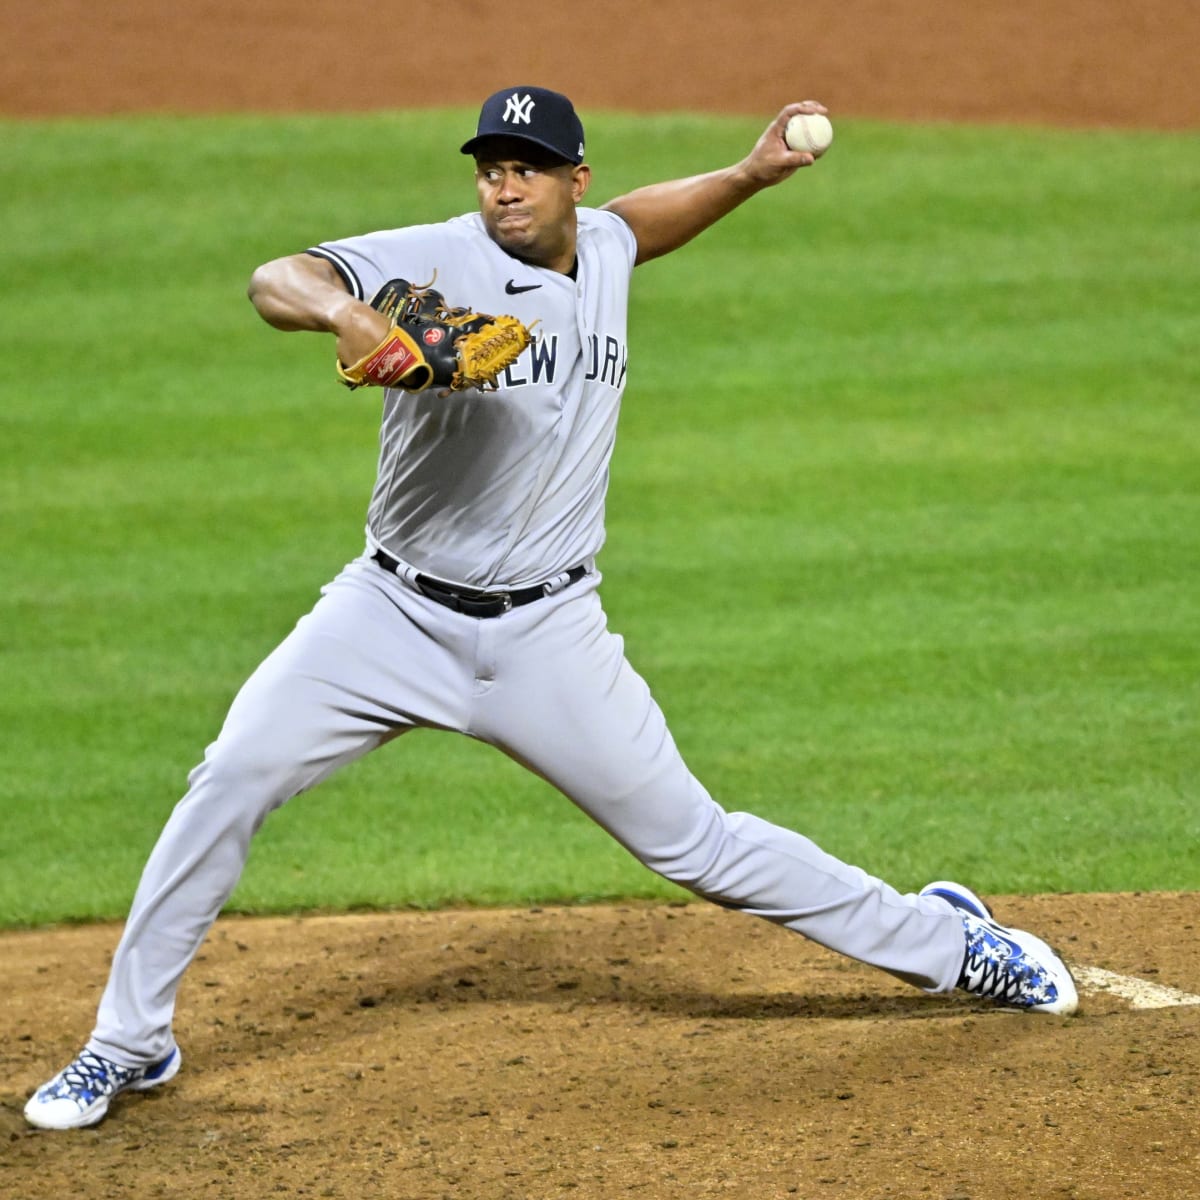 How Wandy Peralta Wandered into the Hearts of Yankees' Fans